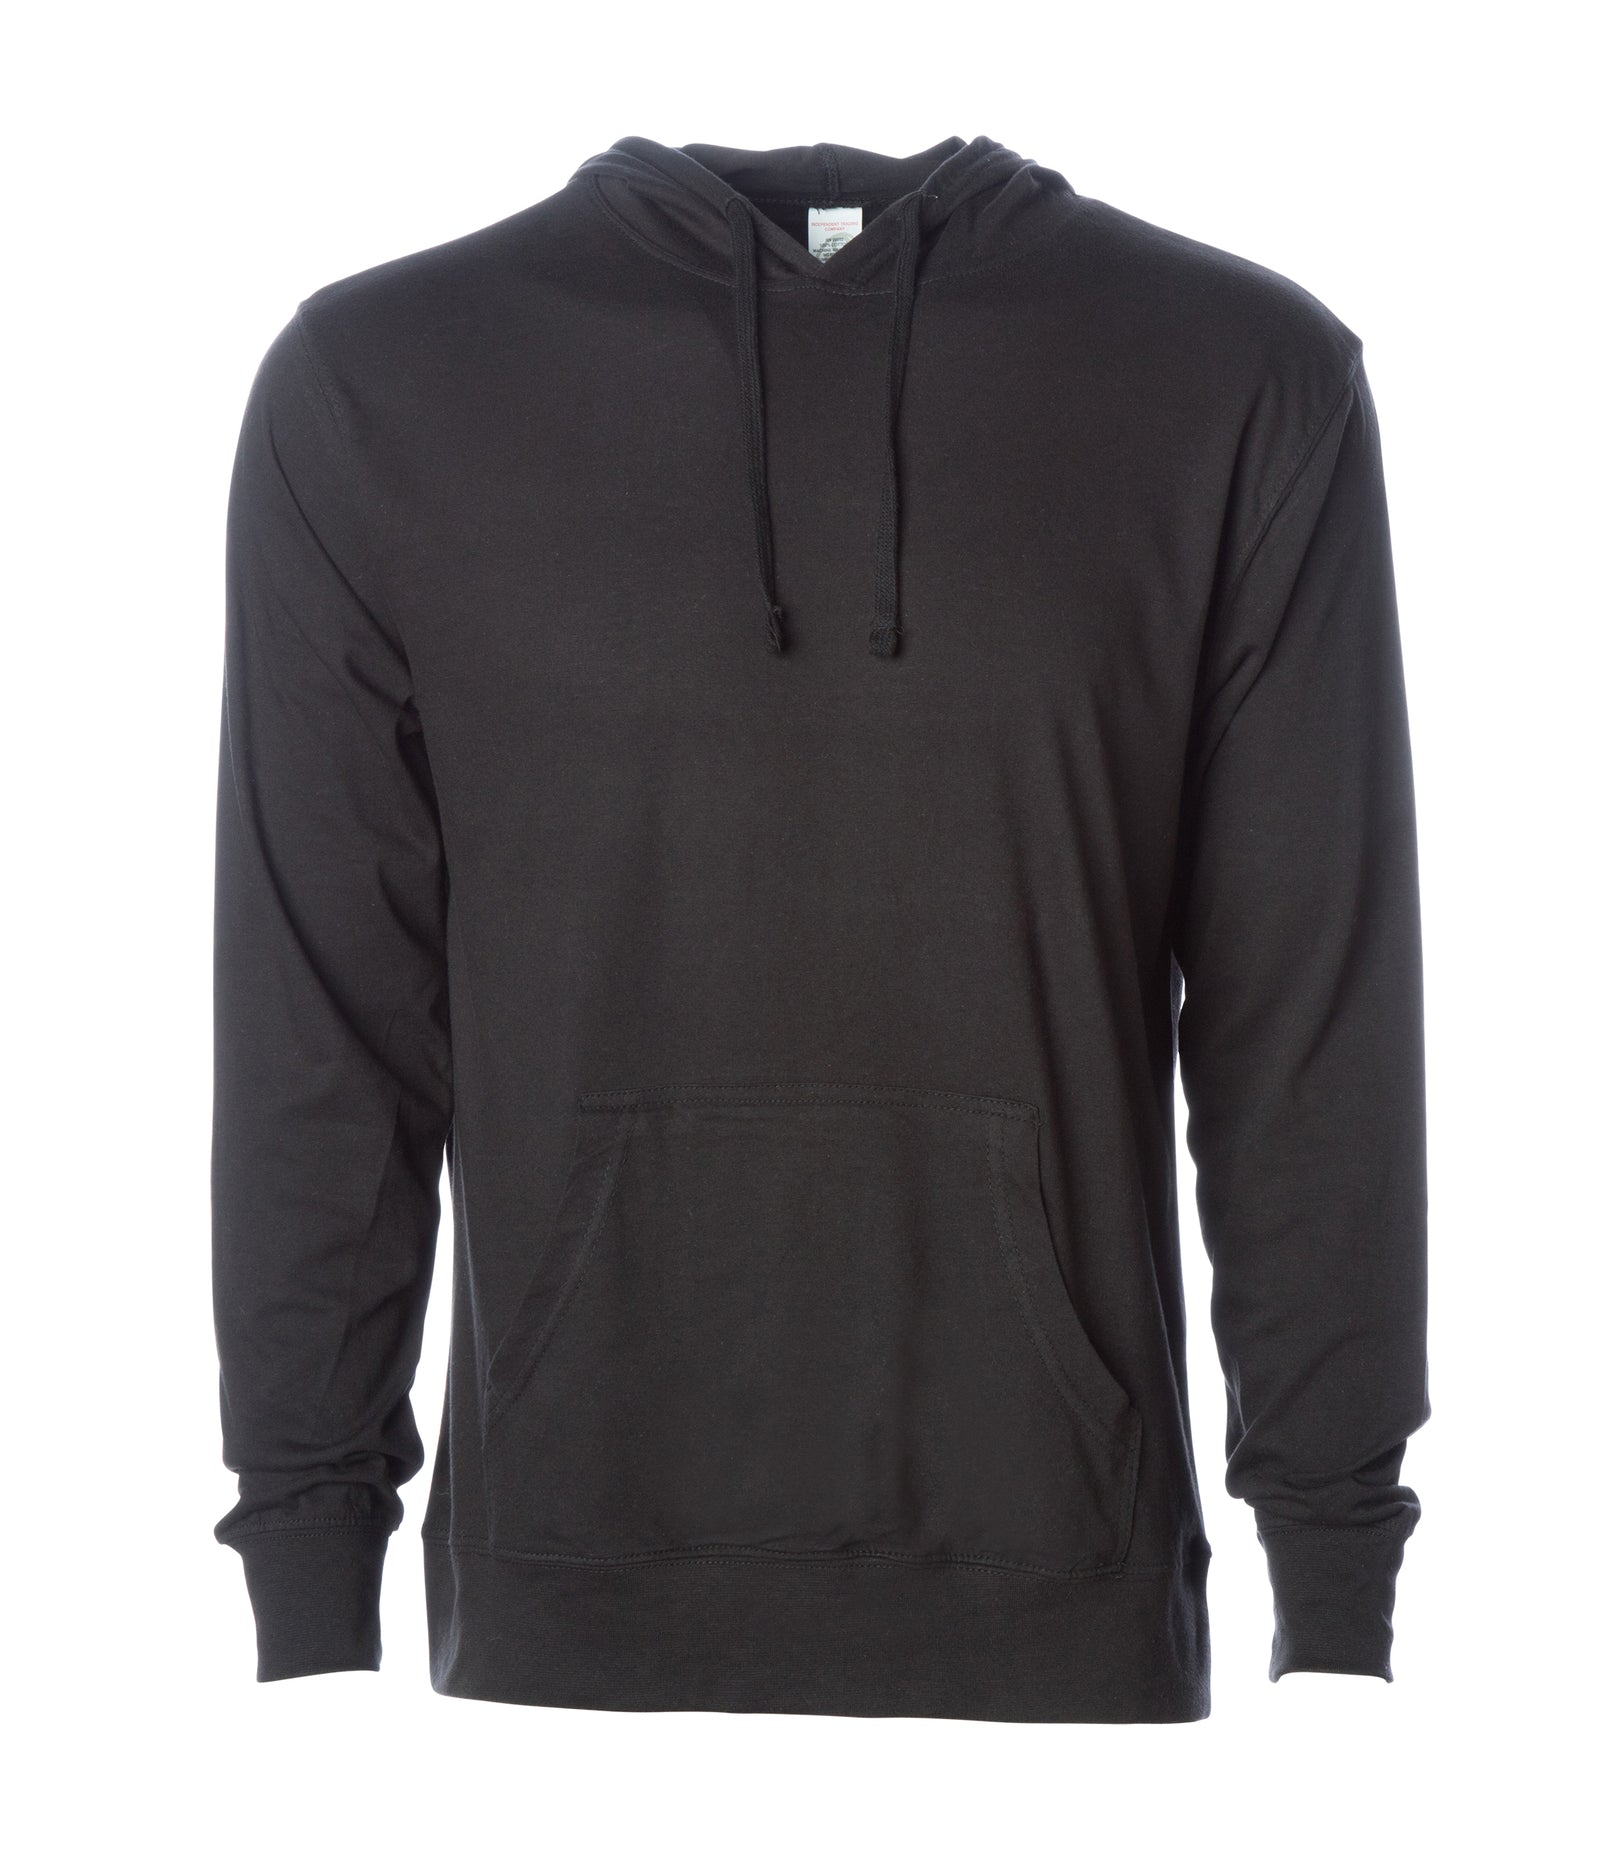 Lightweight Jersey Hooded Pullover | Independent Trading Company